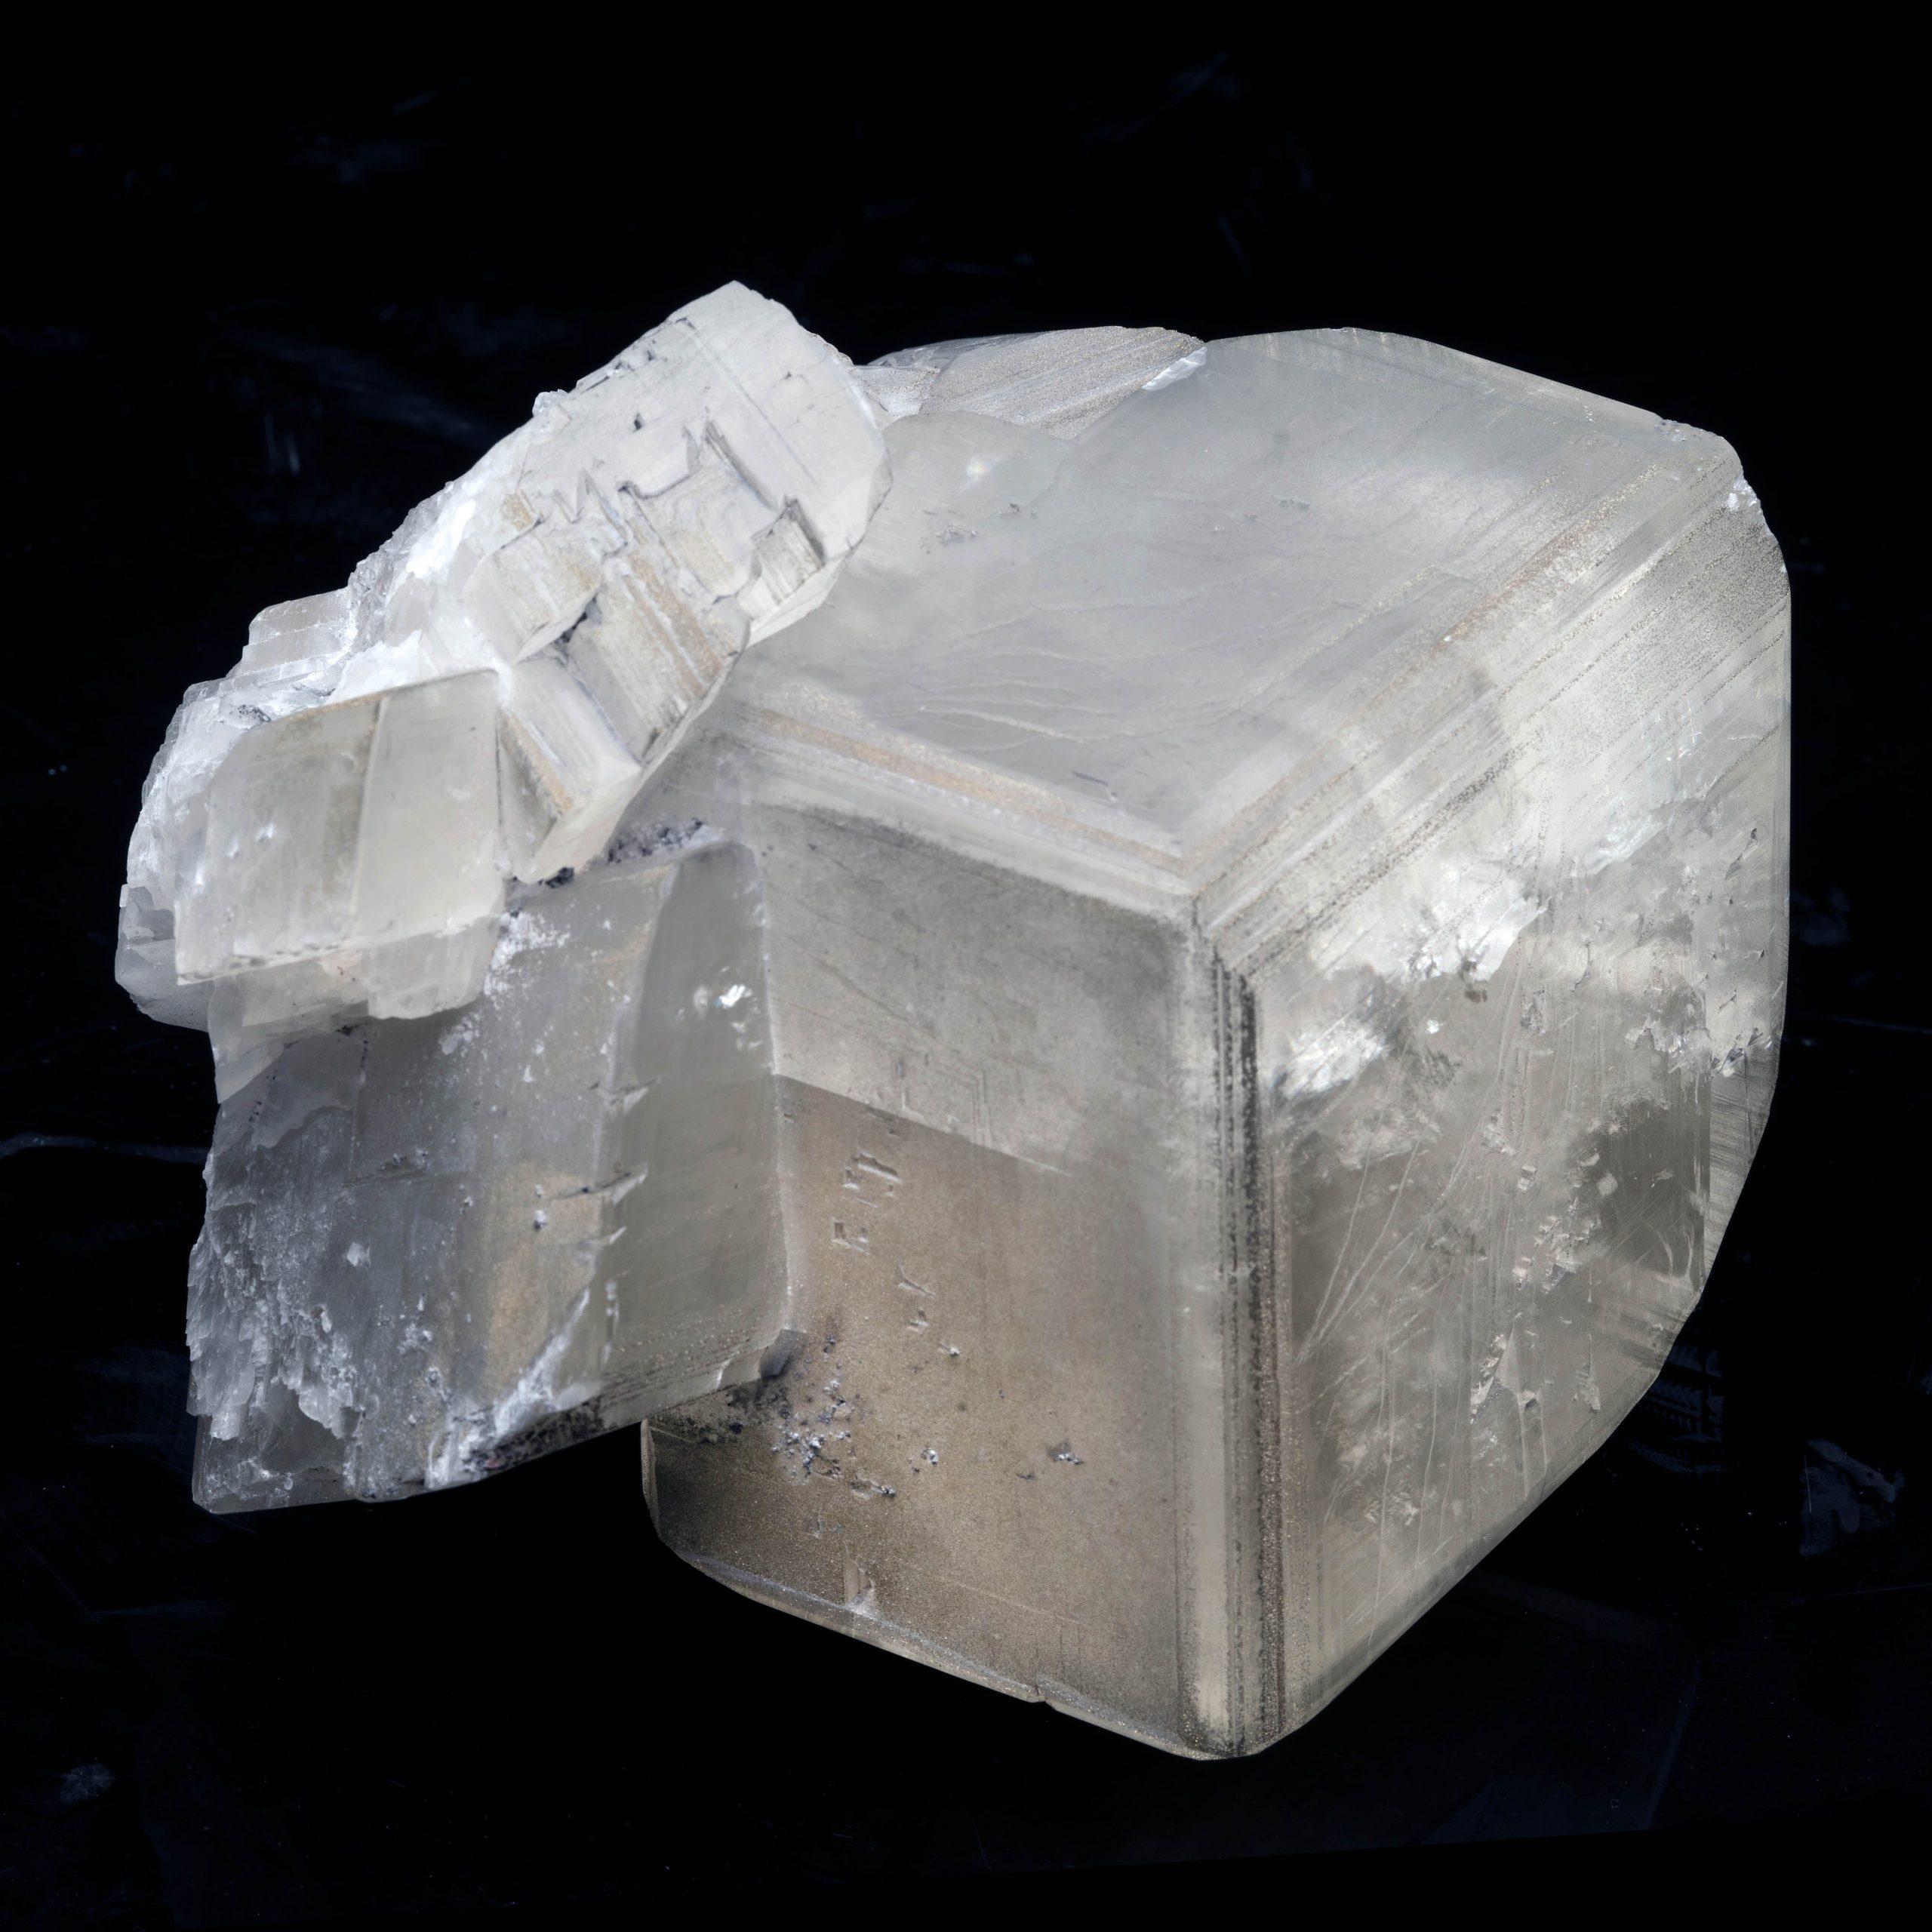 This formation of massive, beautifully formed, incredibly gemmy calcite crystals characteristic of the Chengzhou location came out of the ground over a decade ago and will make a classic addition to your collection. Finely dusted with lustrous